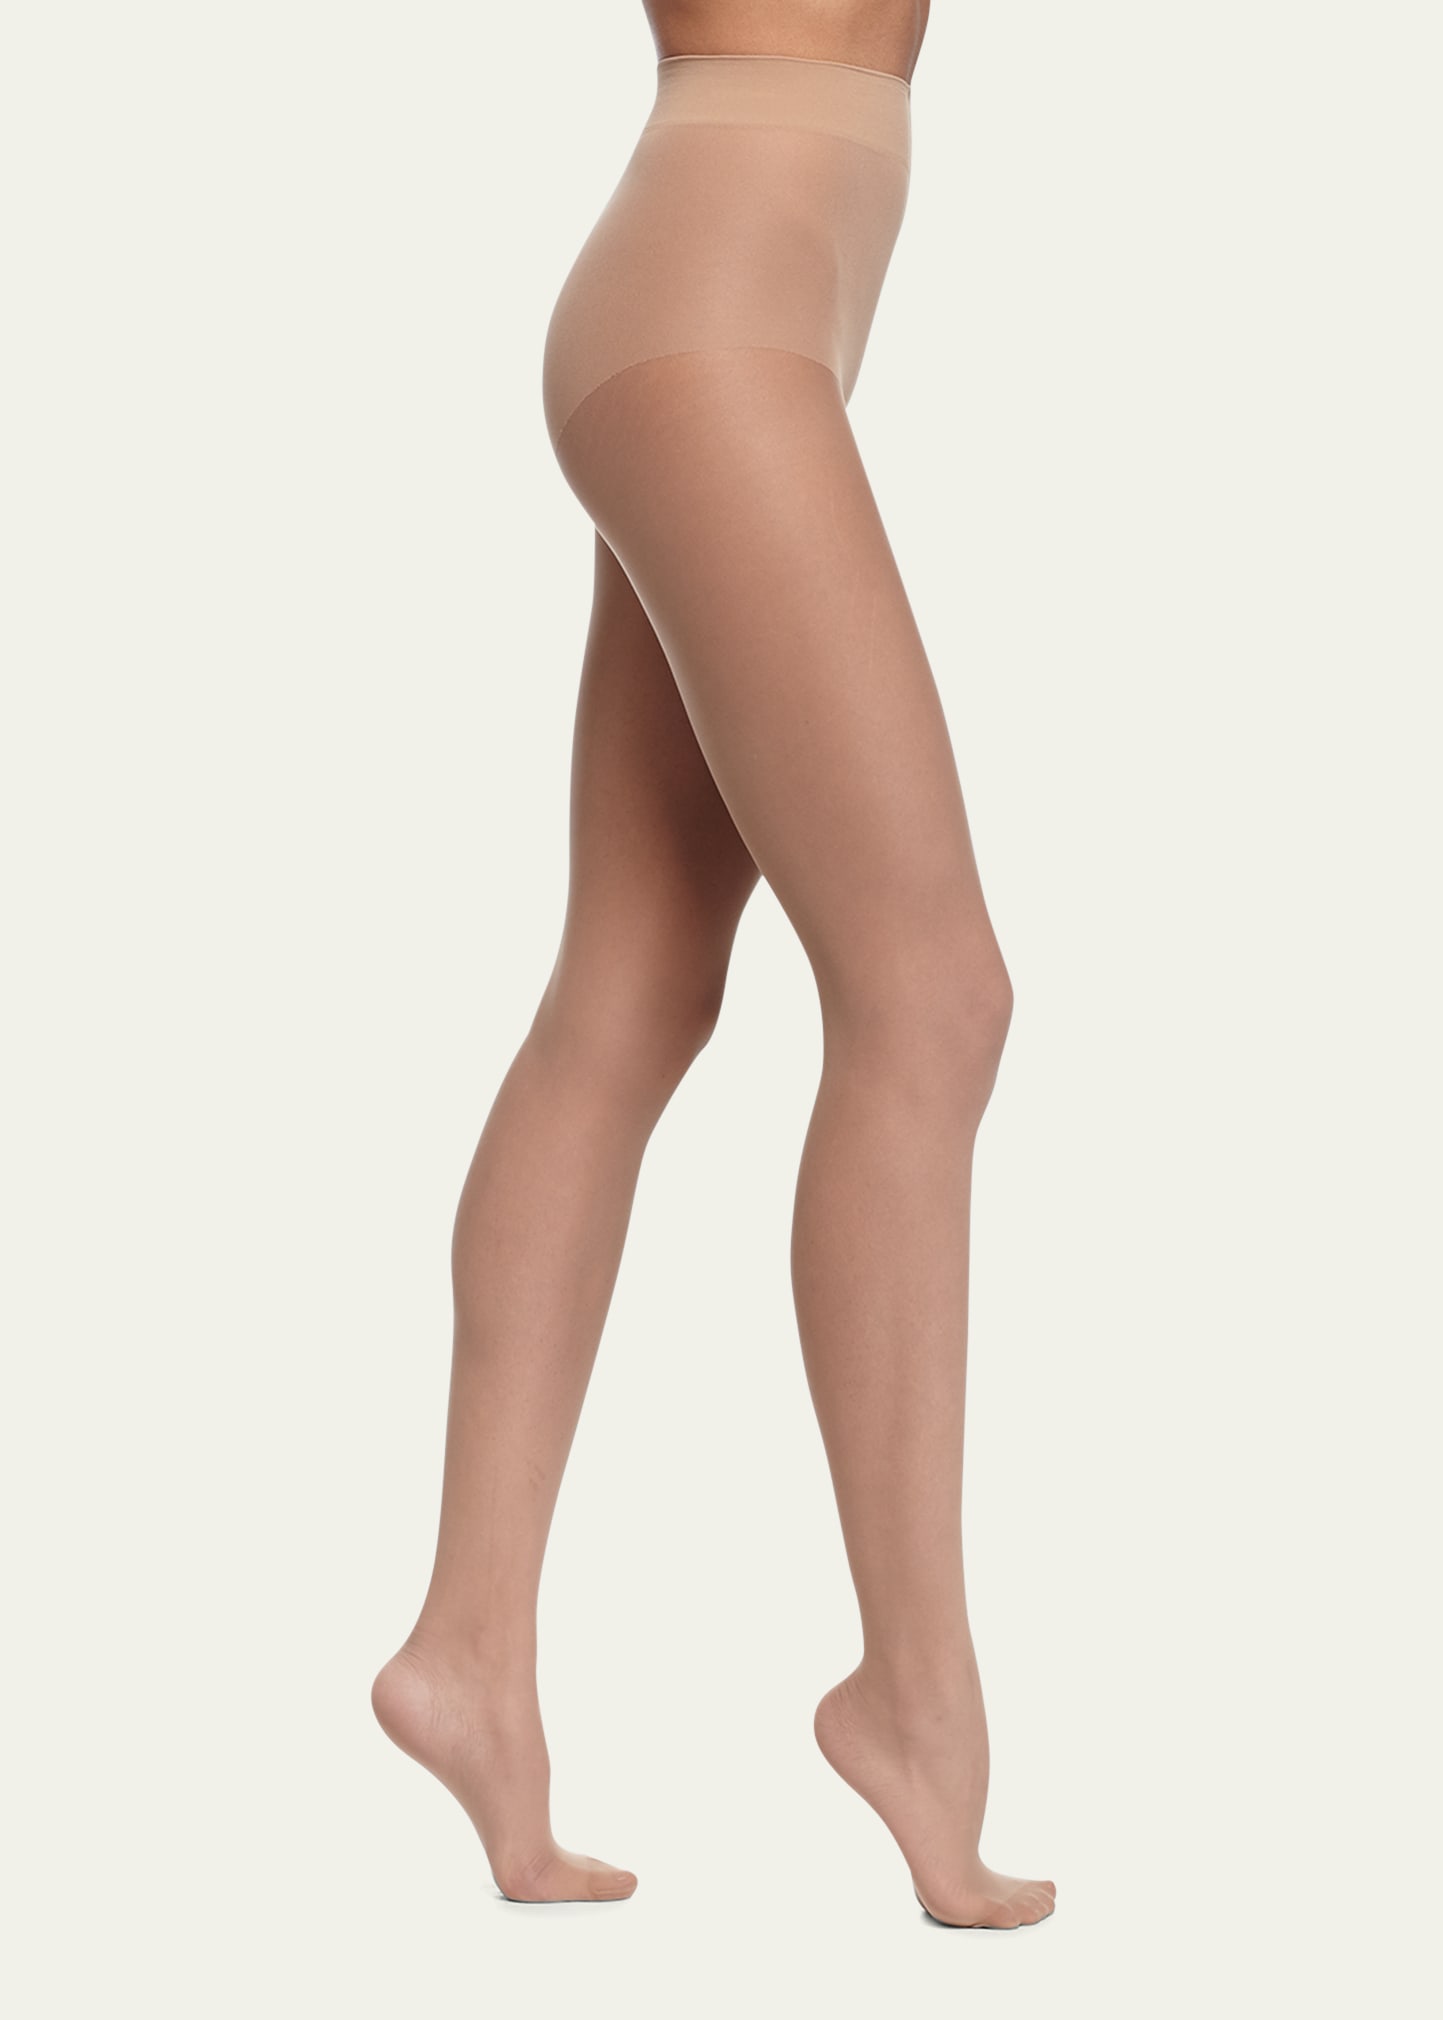 Wolford Pure 10 Semisheer Tights In Fairly Light